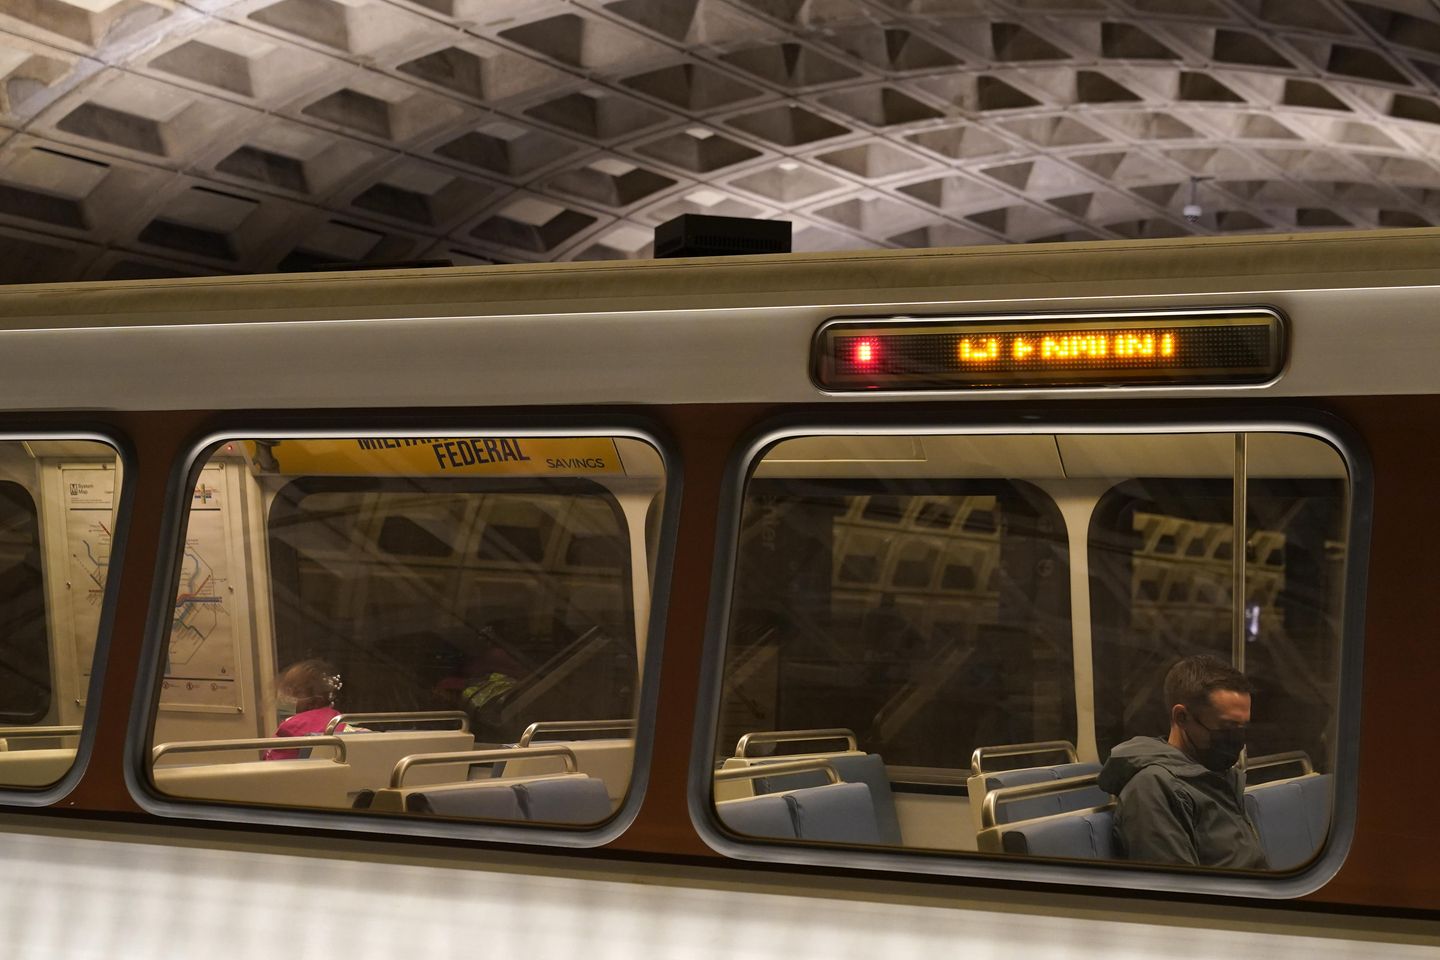 Washington D.C. Metro pulls trains out of service due to defect